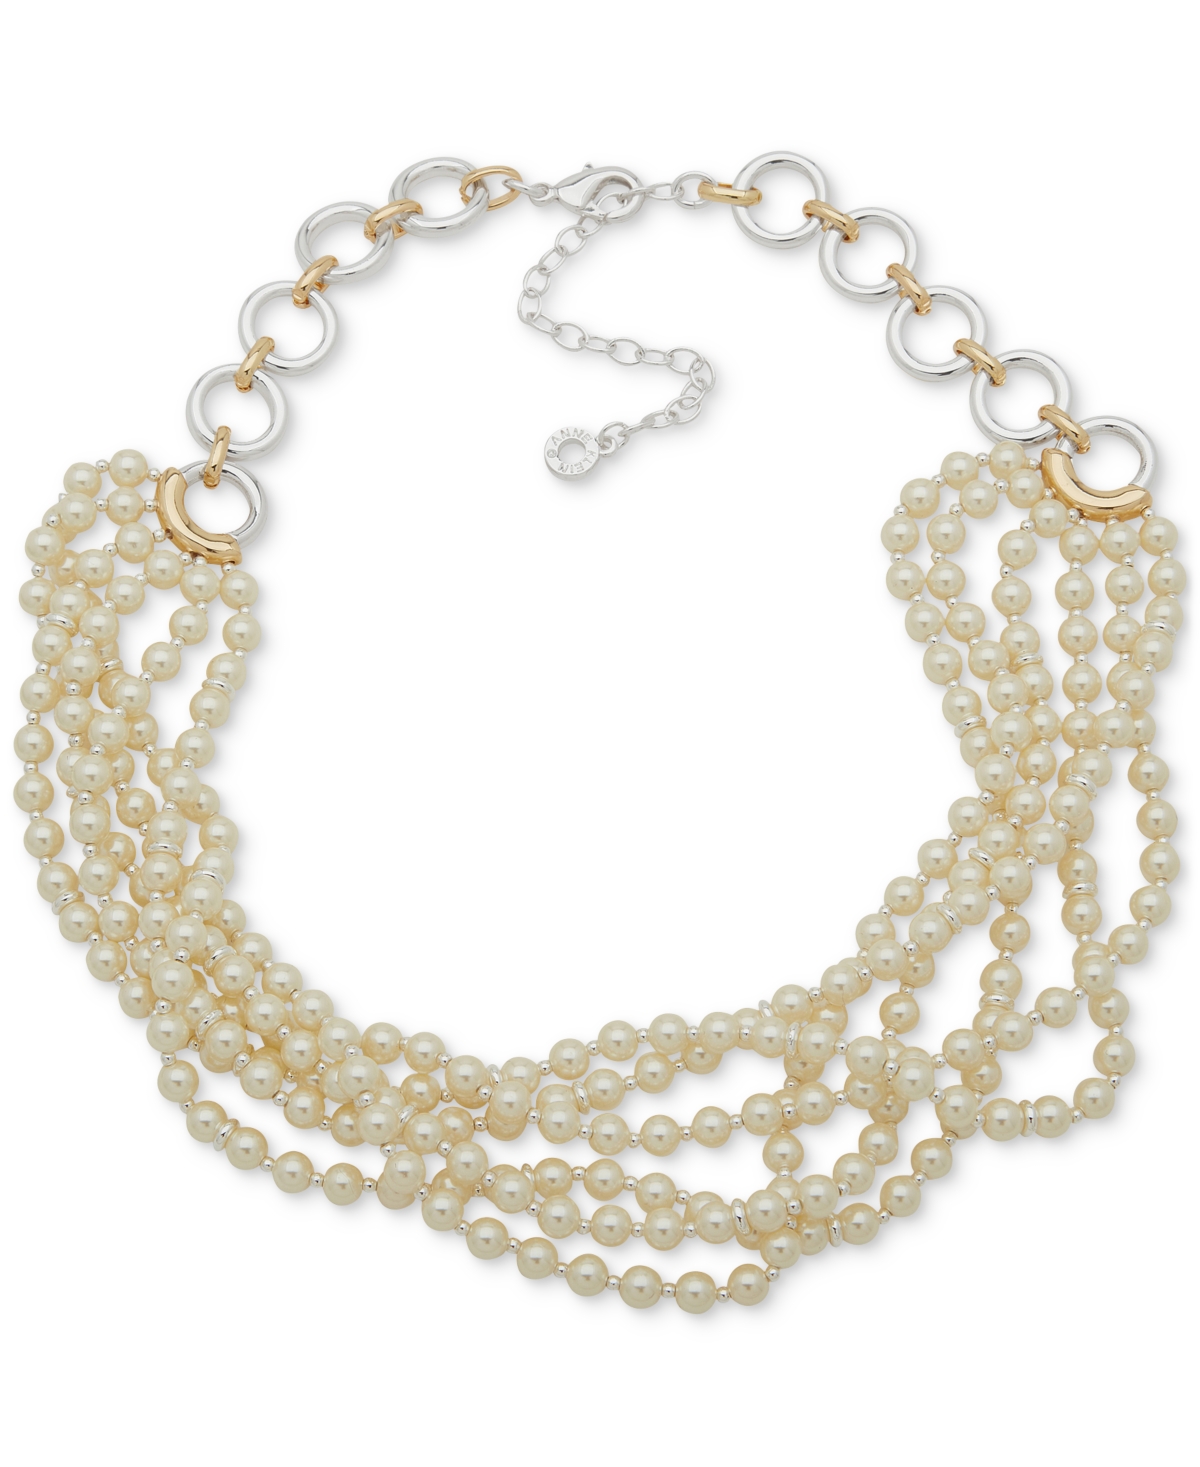 Two-Tone Imitation Pearl Ring Layered Statement Necklace, 16" + 3" extender - Pearl